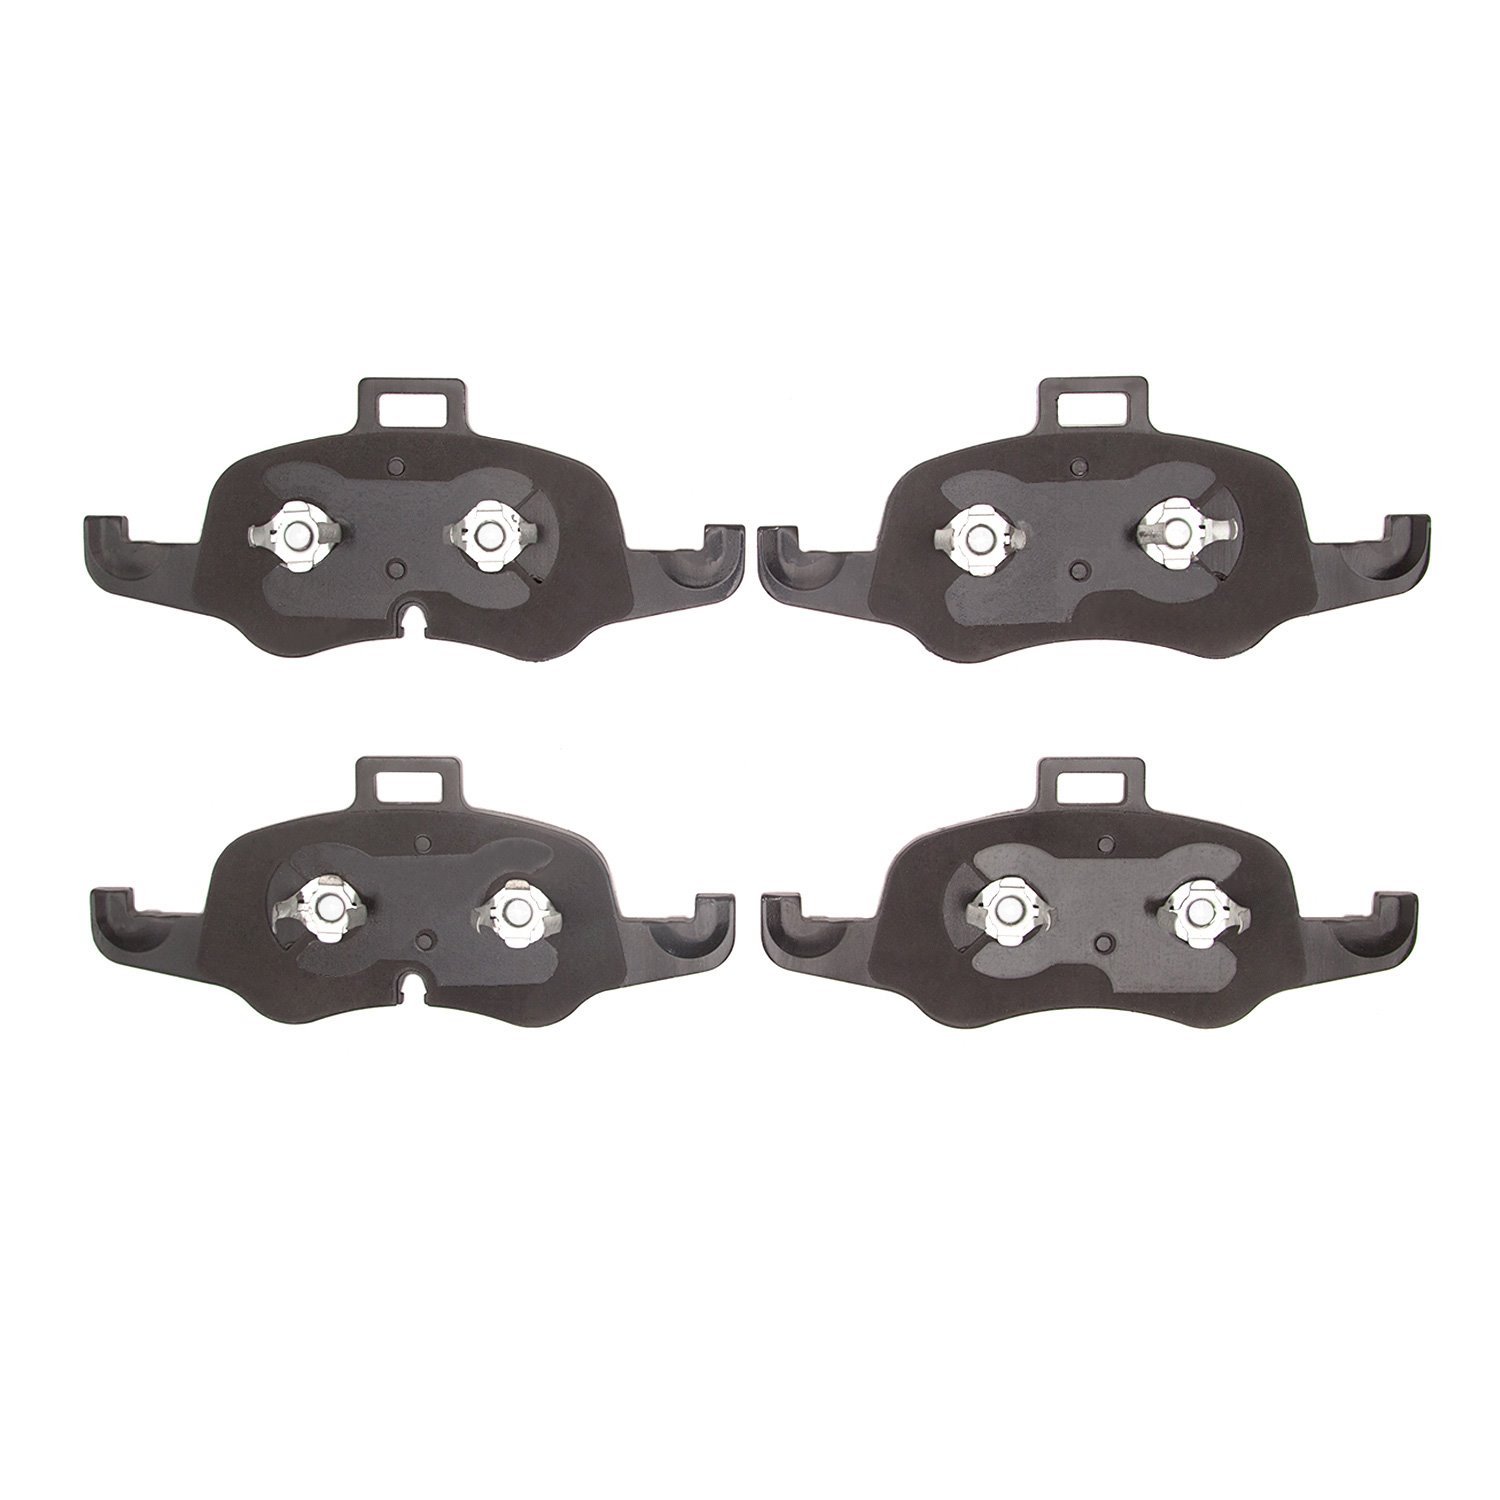 1551-2241-00 5000 Advanced Low-Metallic Brake Pads, Fits Select Audi/Volkswagen, Position: Front